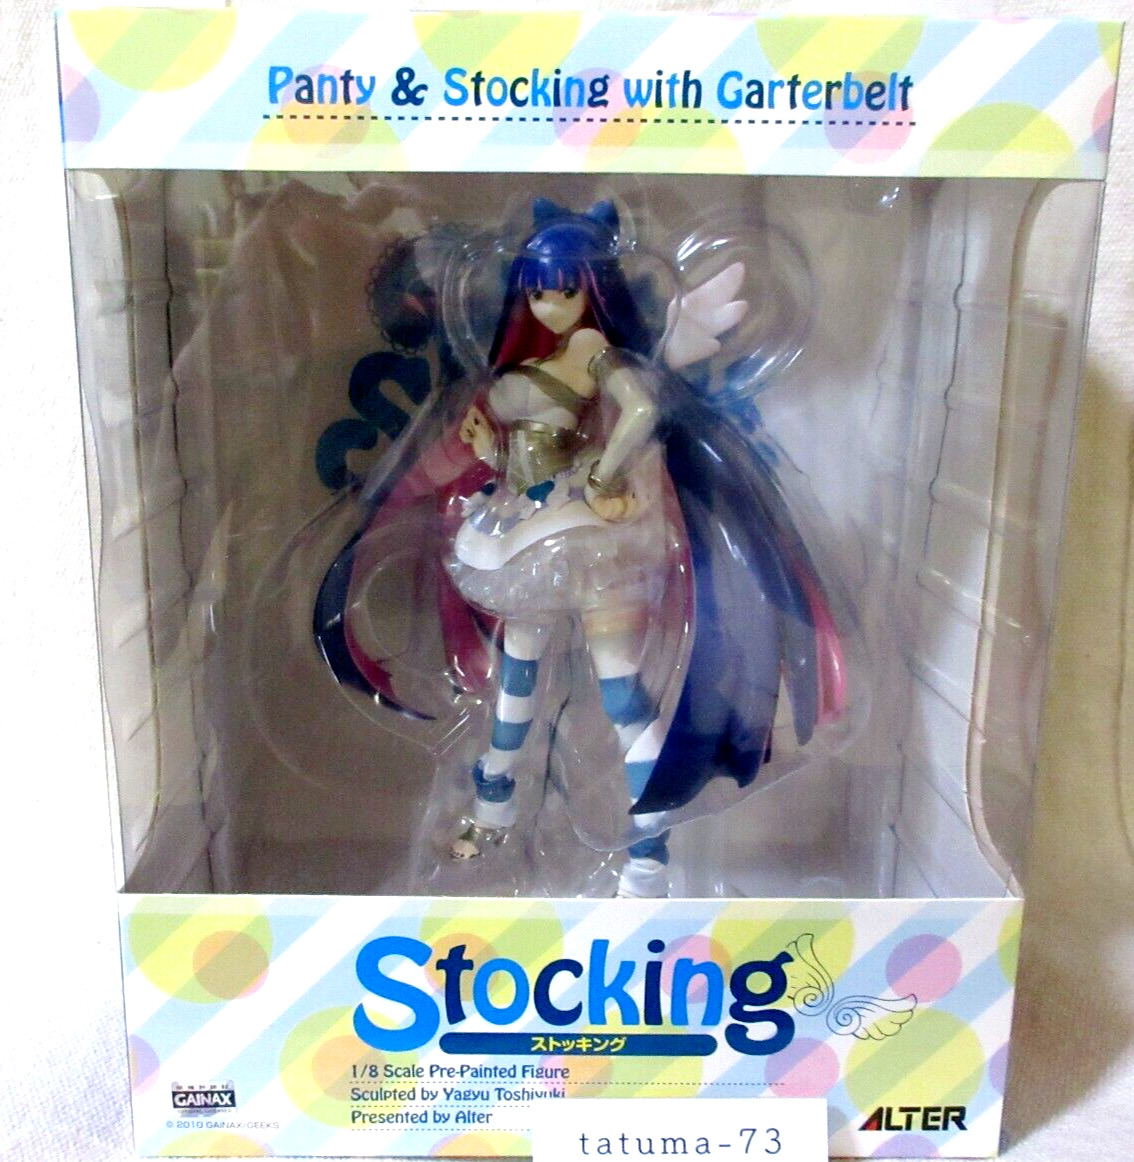 Alter Panty & Stocking With Garterbelt Stocking 1/8 PVC Scale Figure NEW